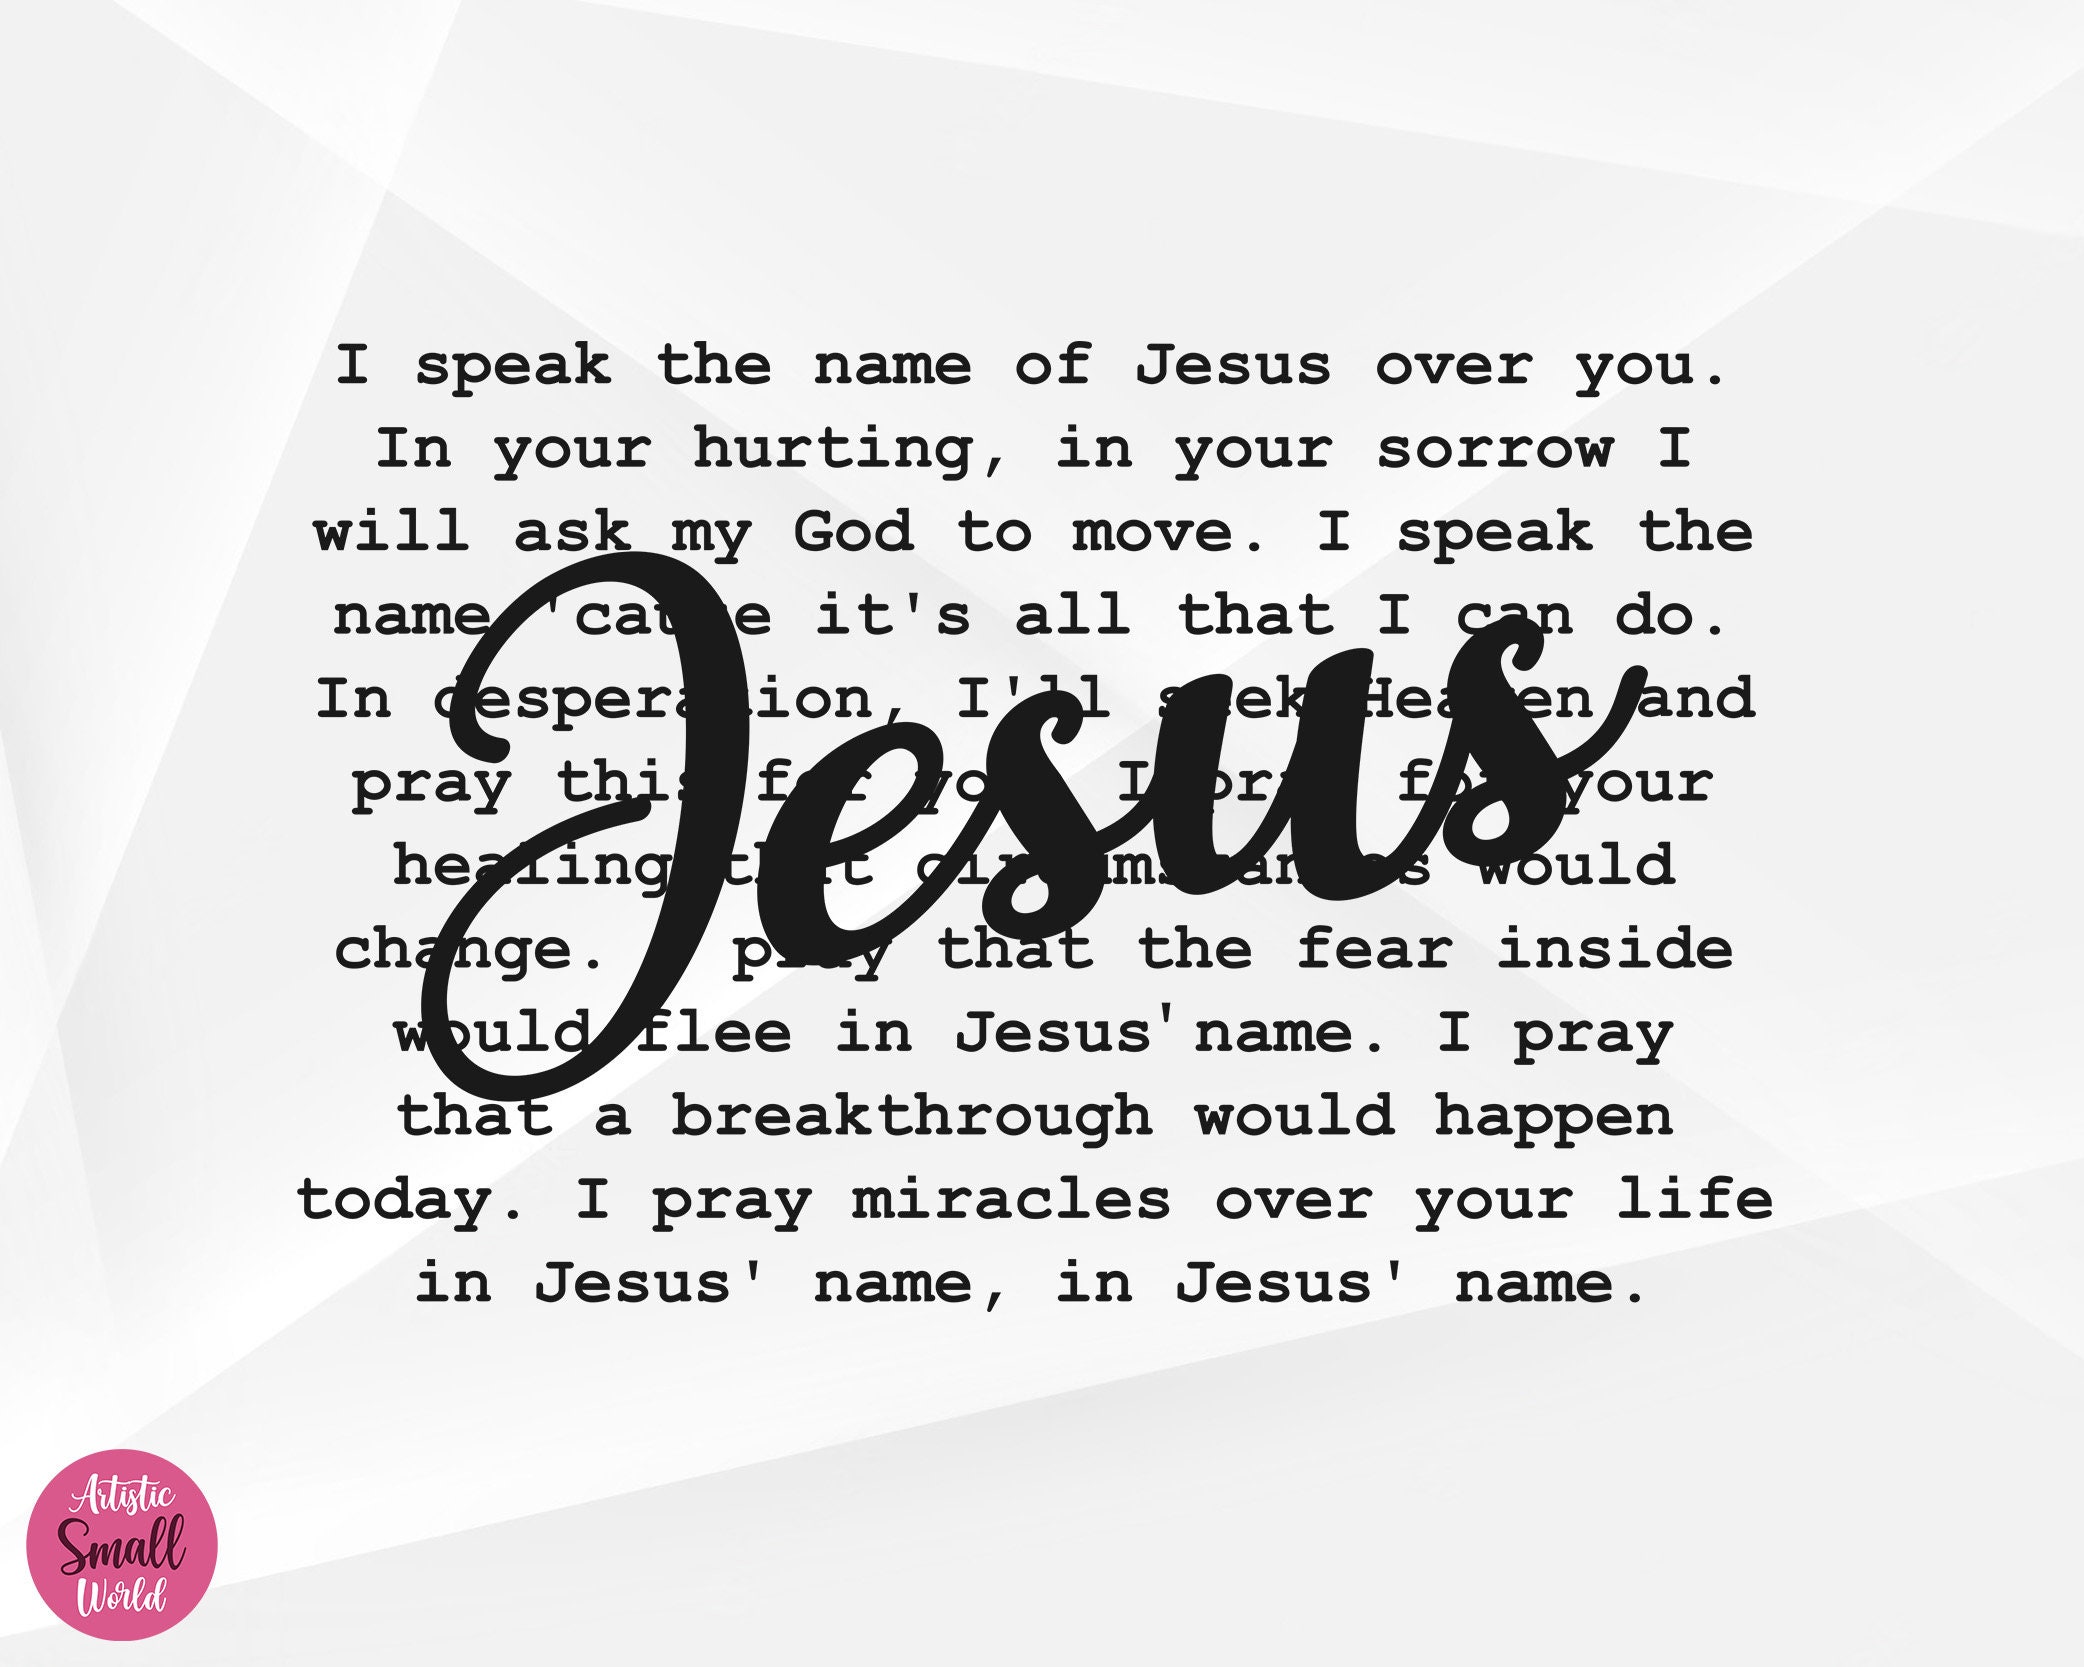 In your world I have another name. That name is Jesus Christ as